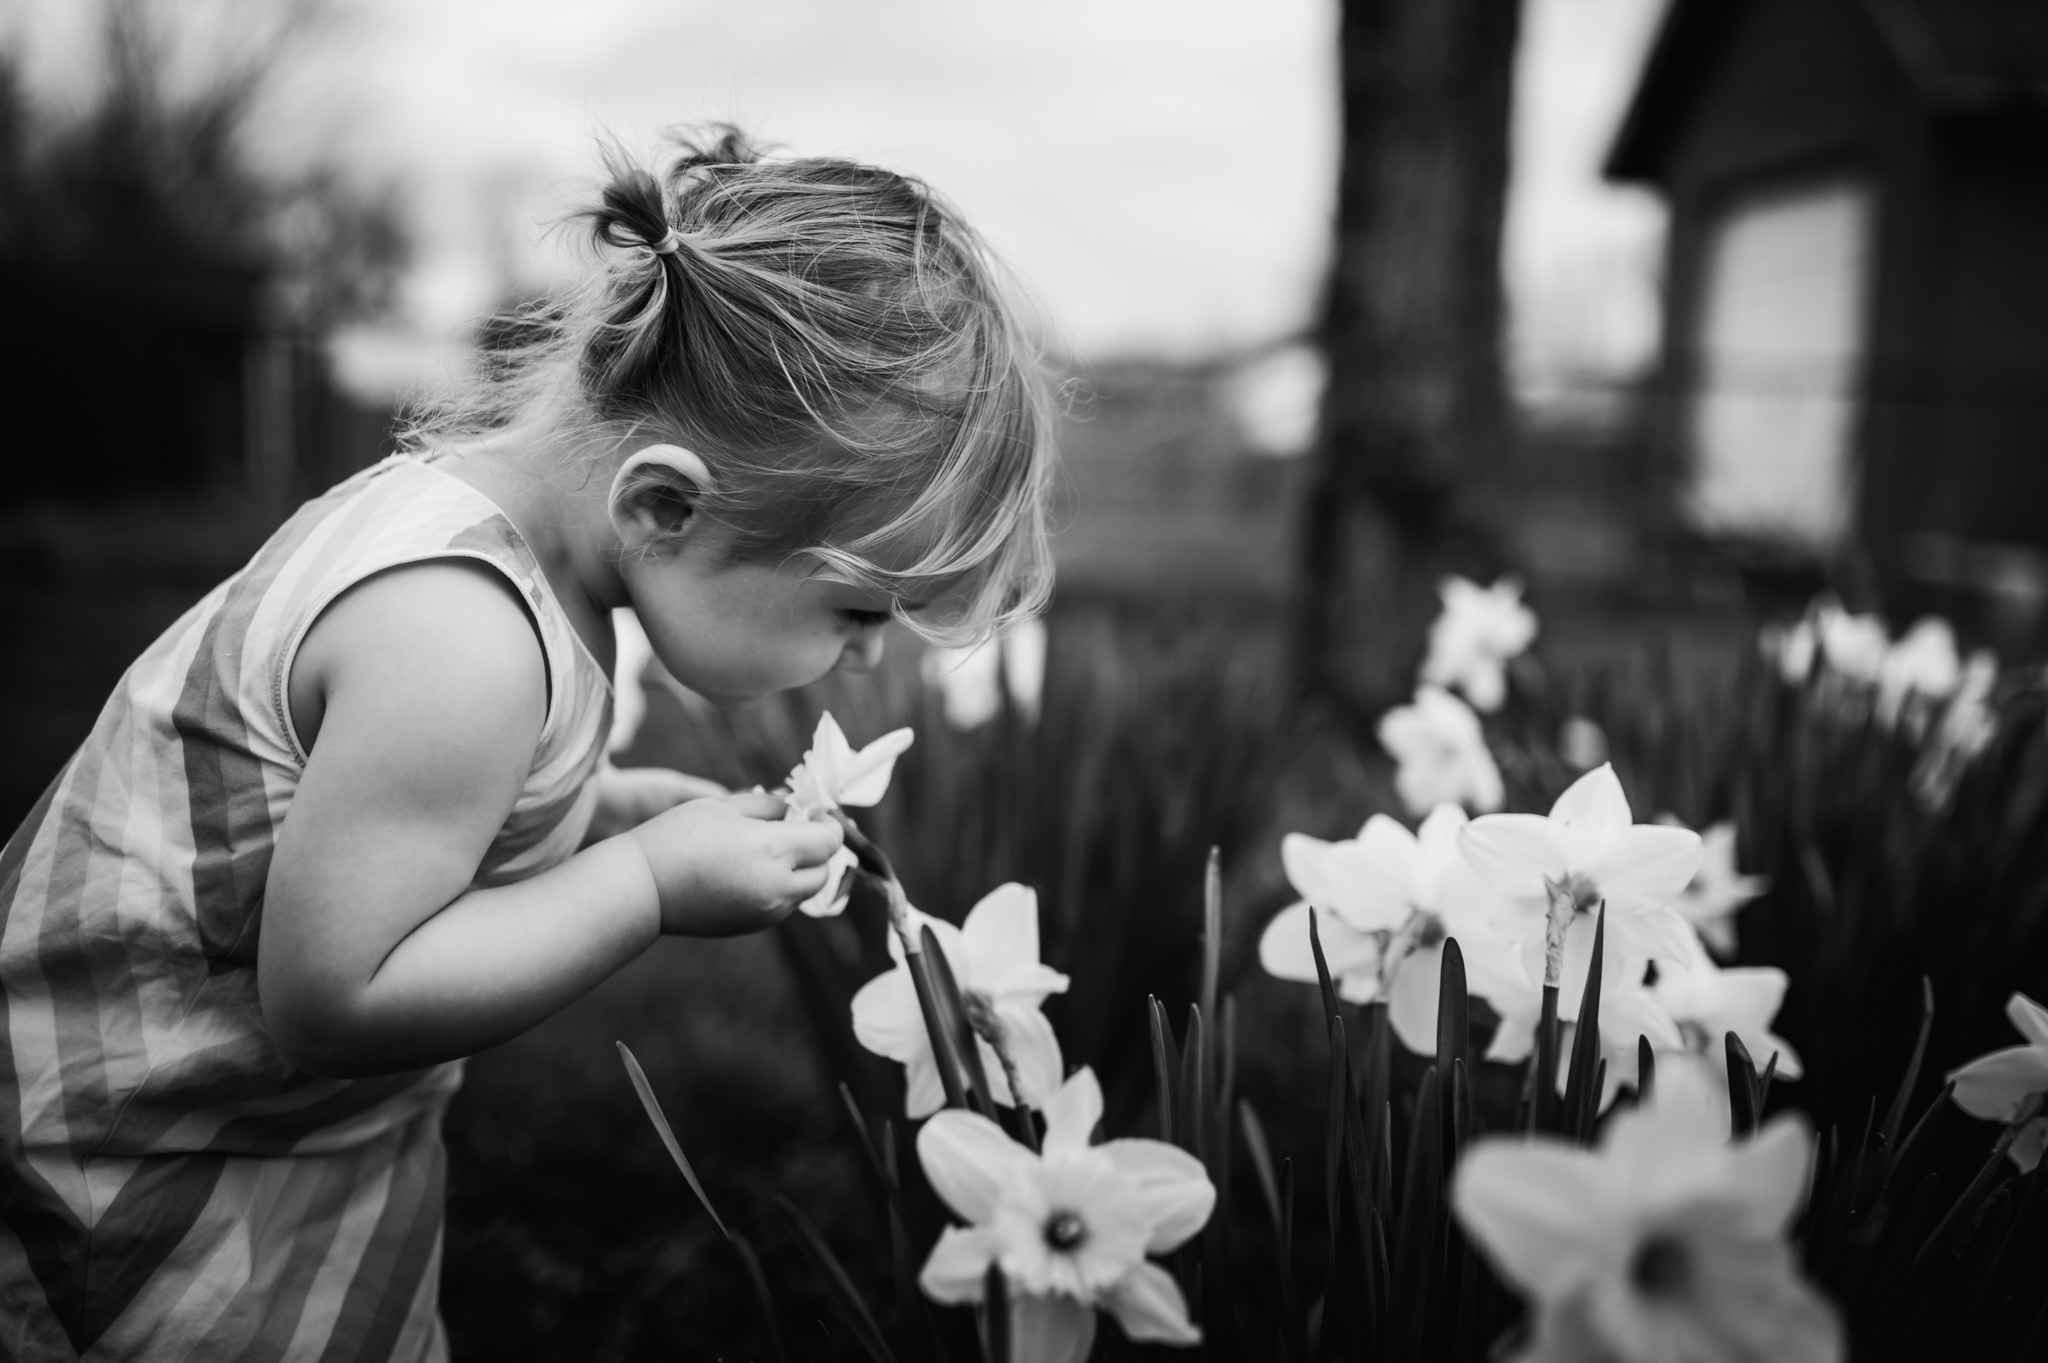 Storytelling in Black and White - Girl with Flowers